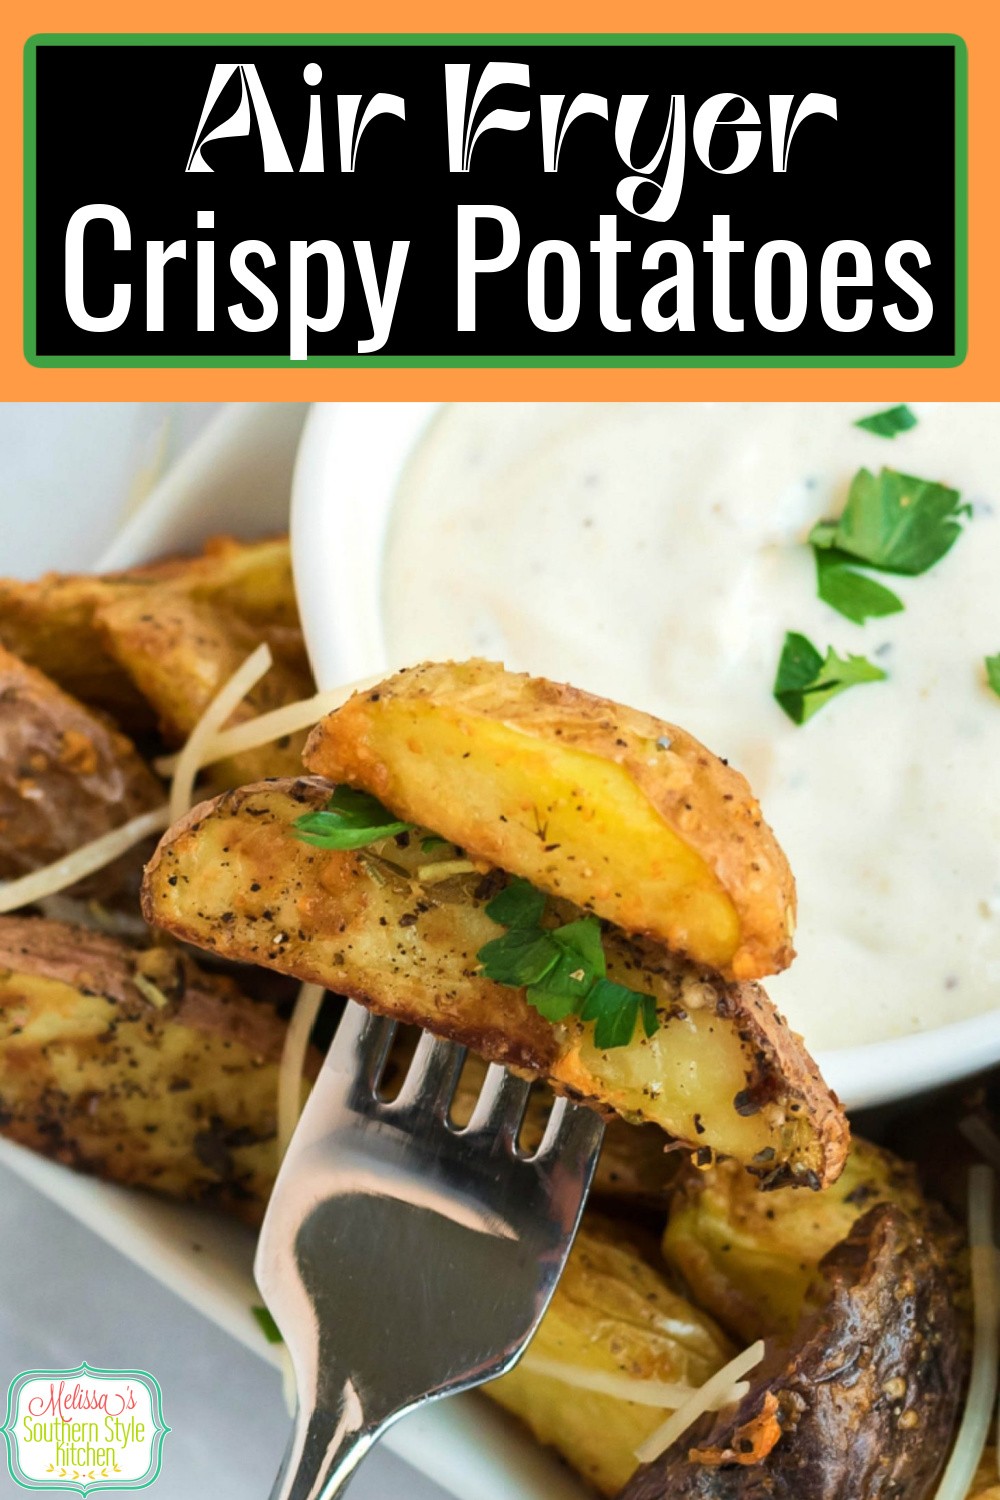 These stunning multi-colored Air Fryer Crispy Potatoes make an impressive side dish. They're easy enough for weekday dining yet, special enough for entertaining family and friends. #airfryerpotatoes #crispypotatoes #airfryerrecipes #potatorecipes #airfryercrispypotatoes #sidedishrecipes #friedpotatoes #southernrecipes #rainbowpotatoes #multicoloredpotatoes via @melissasssk